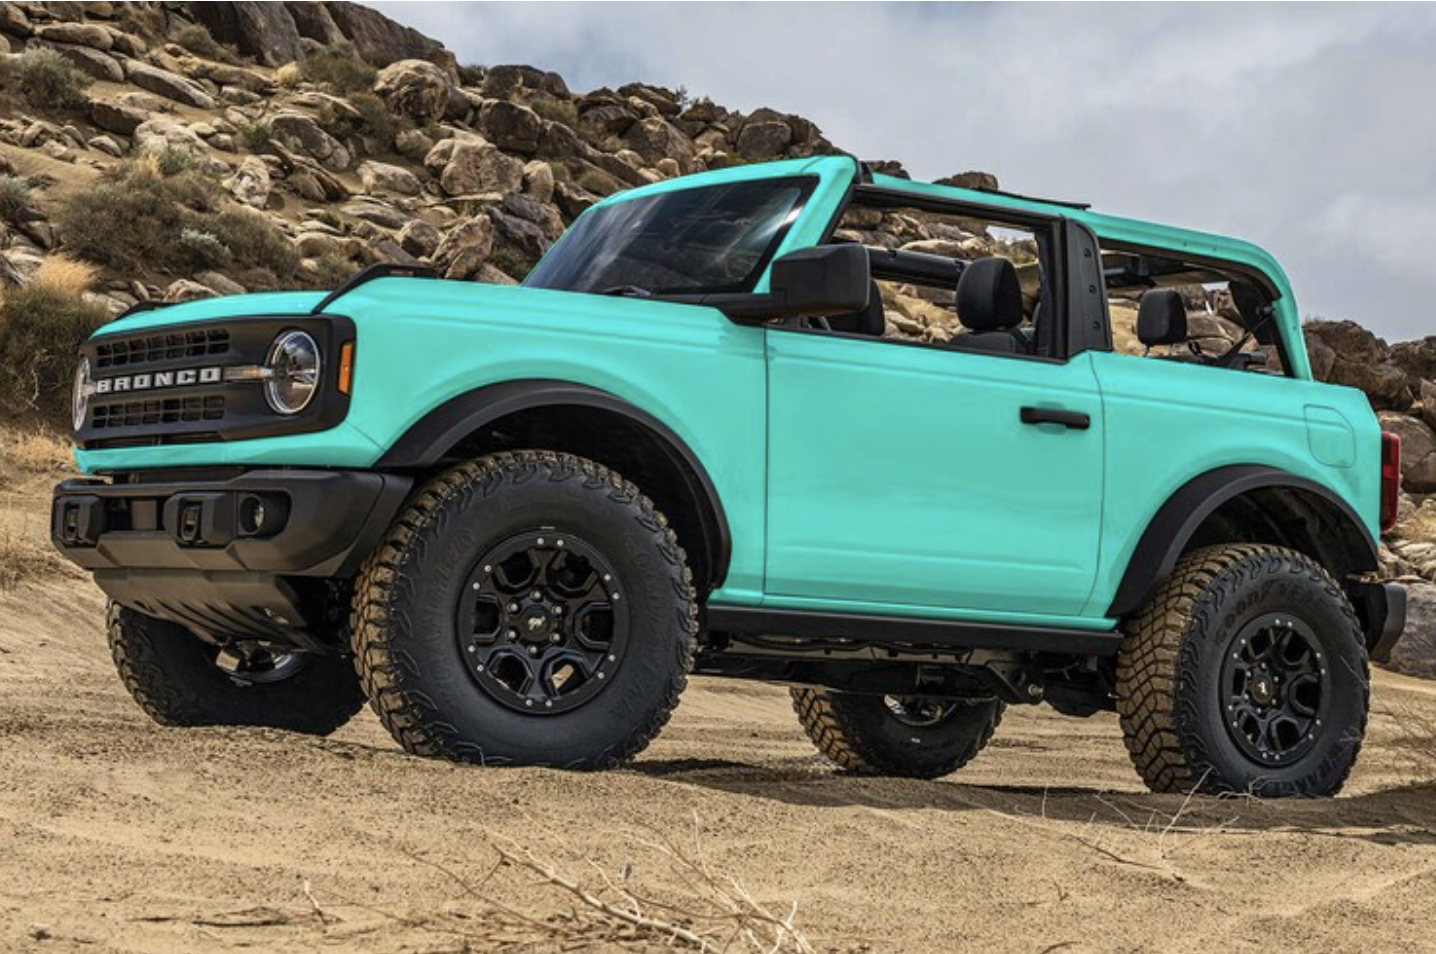 Ford Bronco What 2023 new colors will some of us get to choose from? 614C165C-BDCA-45F3-B85C-293313BB9A29